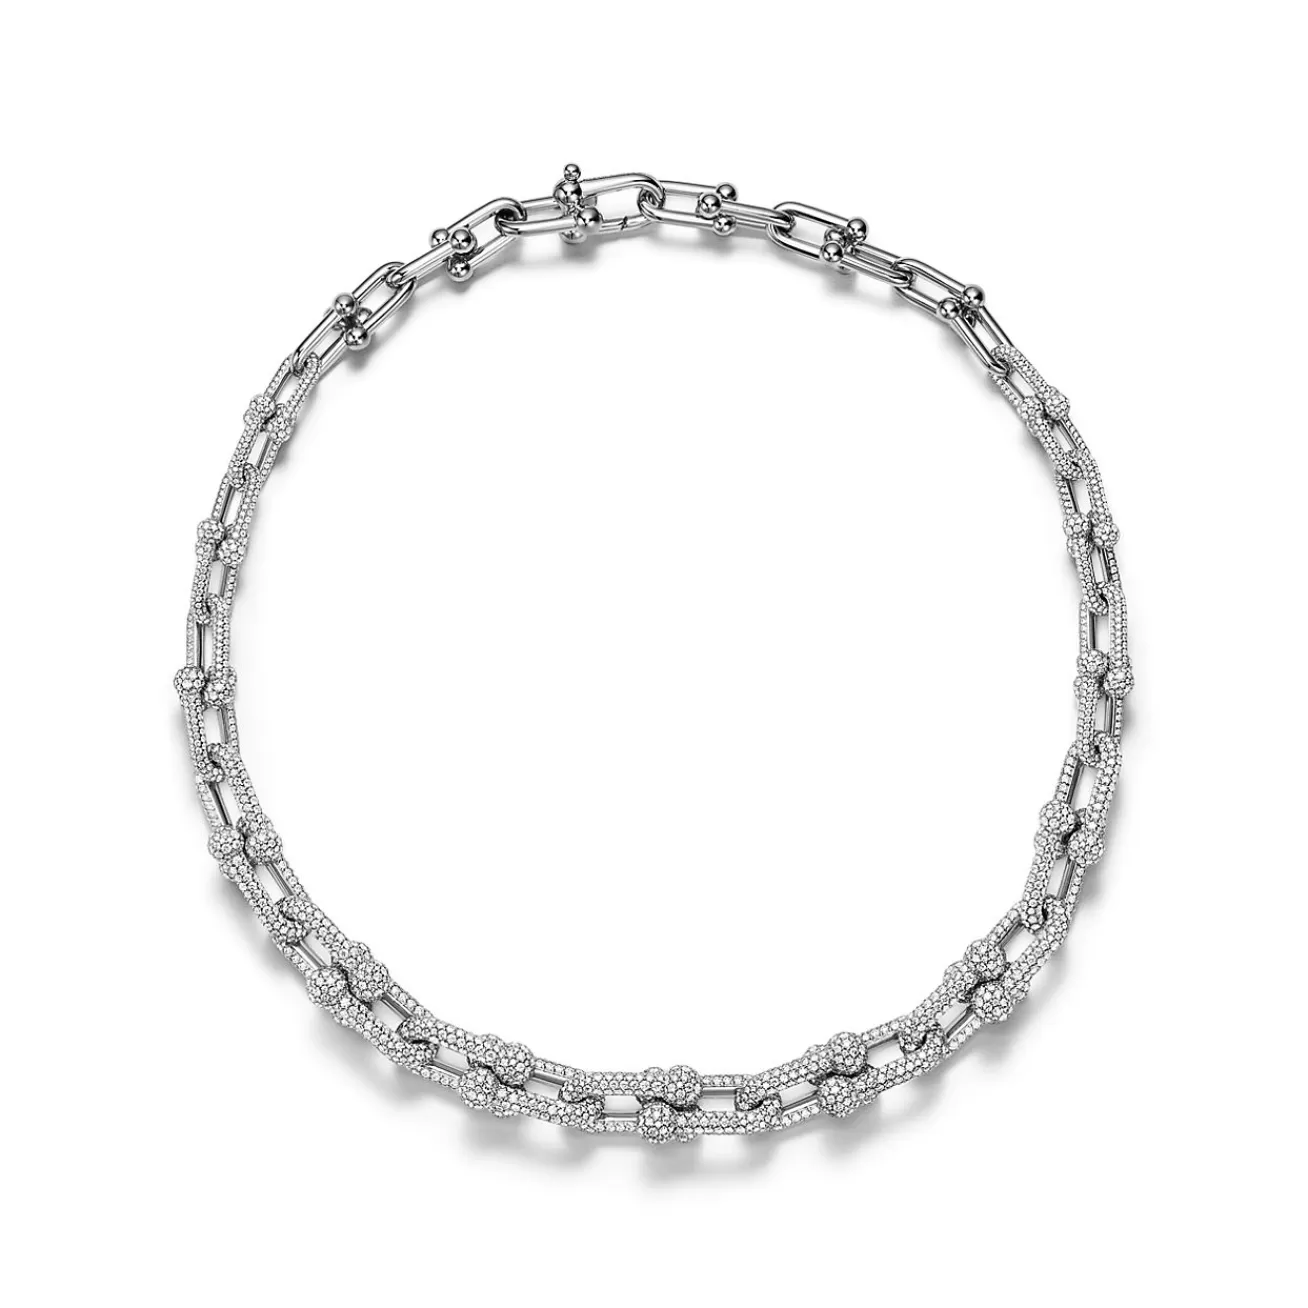 Tiffany & Co. Tiffany HardWear Graduated Link Necklace in White Gold with Pavé Diamonds | ^ Necklaces & Pendants | Men's Jewelry